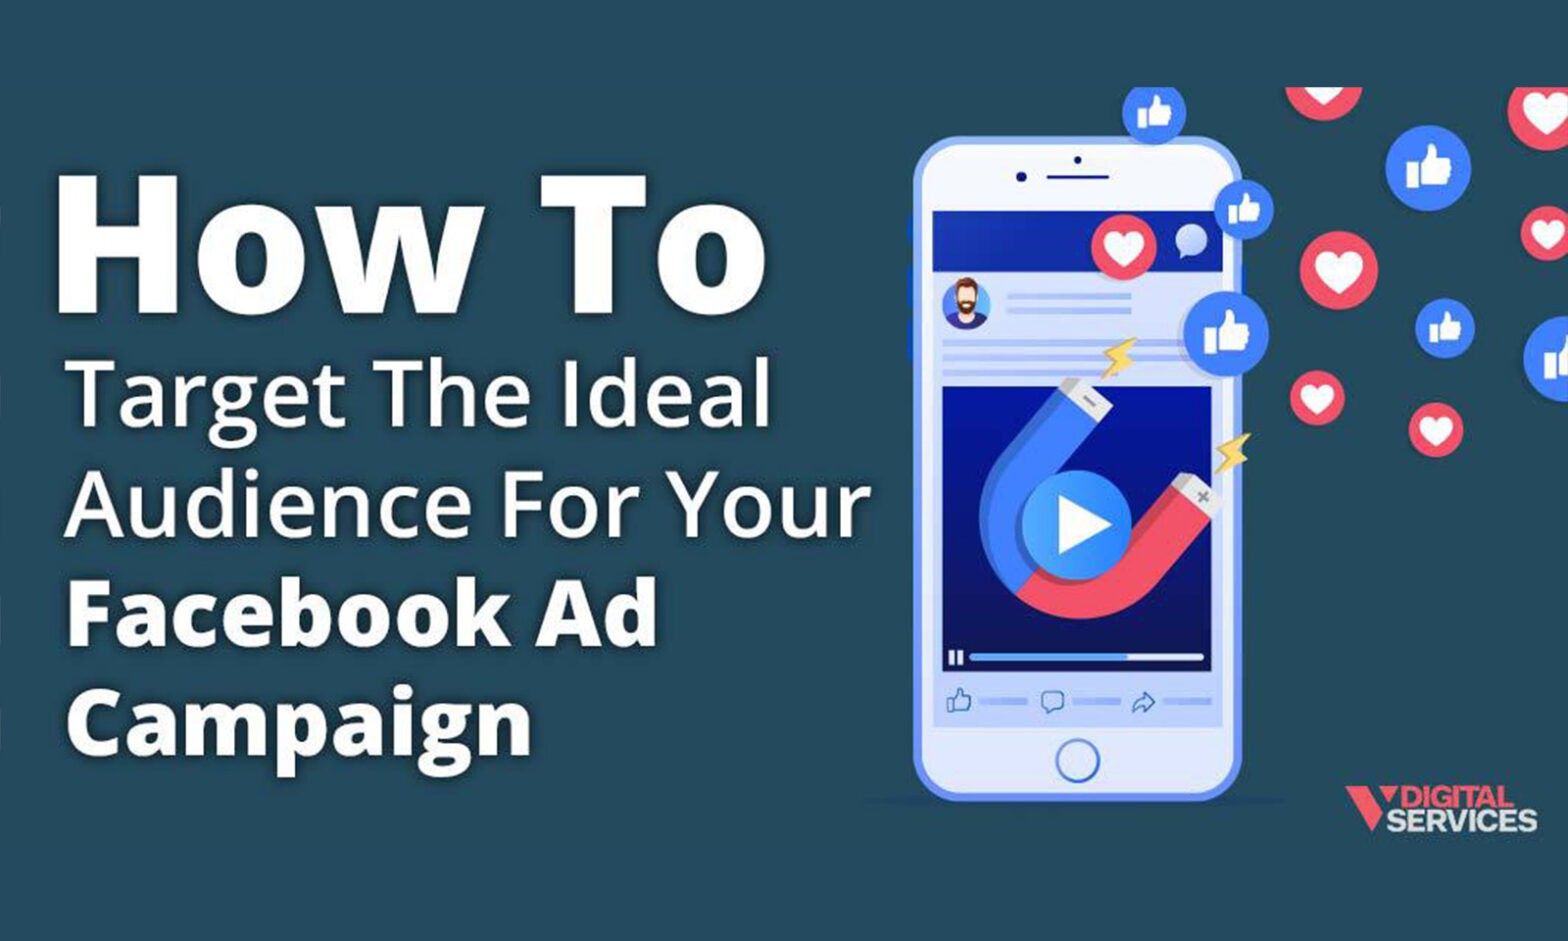 Featured image for post: How to Target the Ideal Audience for Your Facebook Ad Campaign